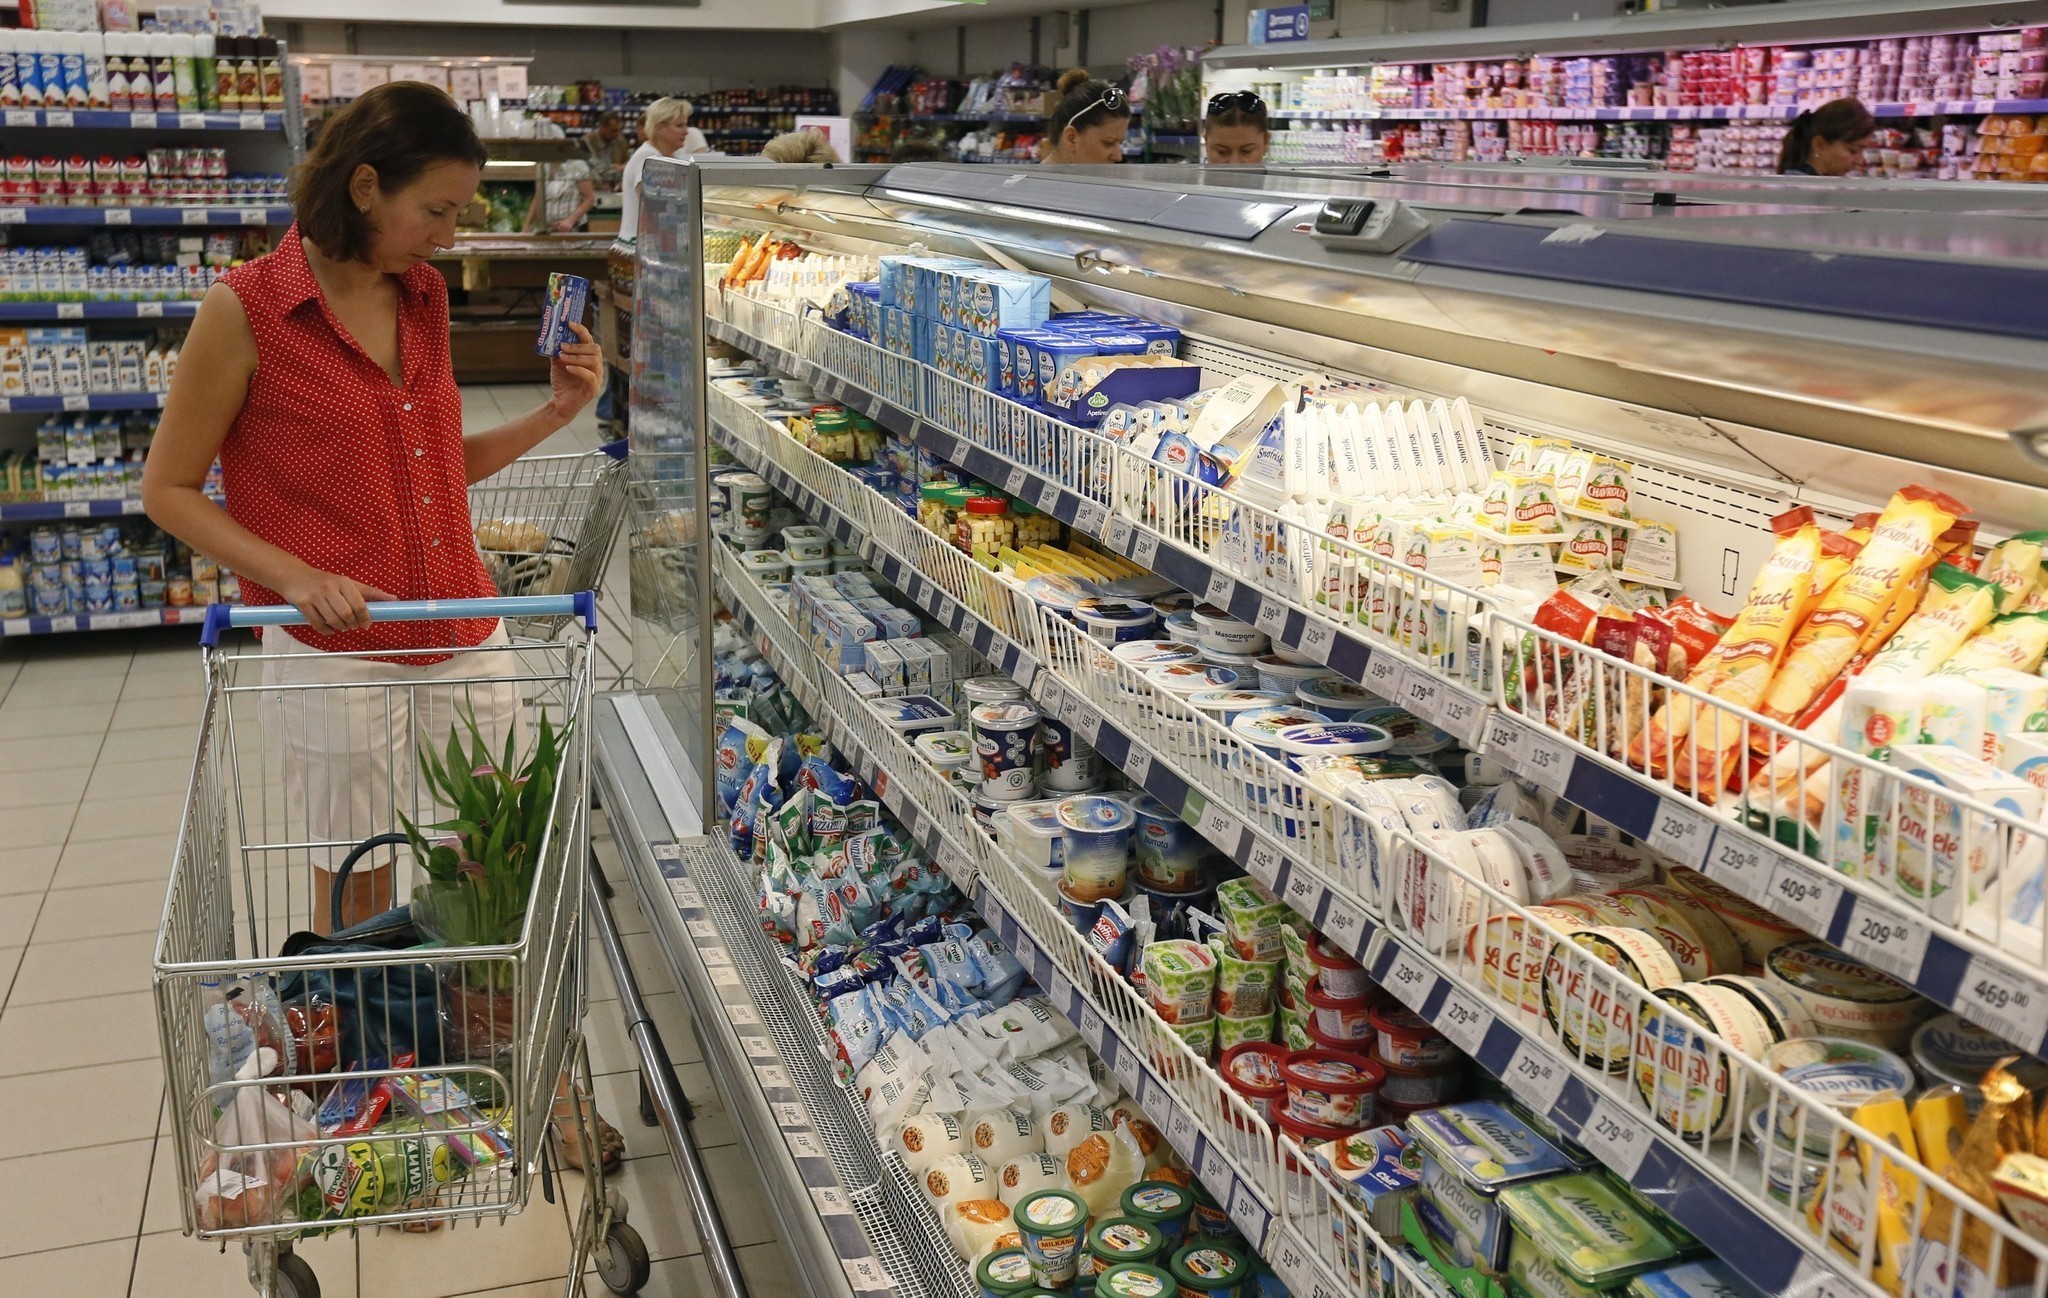 Russia retaliates against sanctions with food imports ban on EU, US